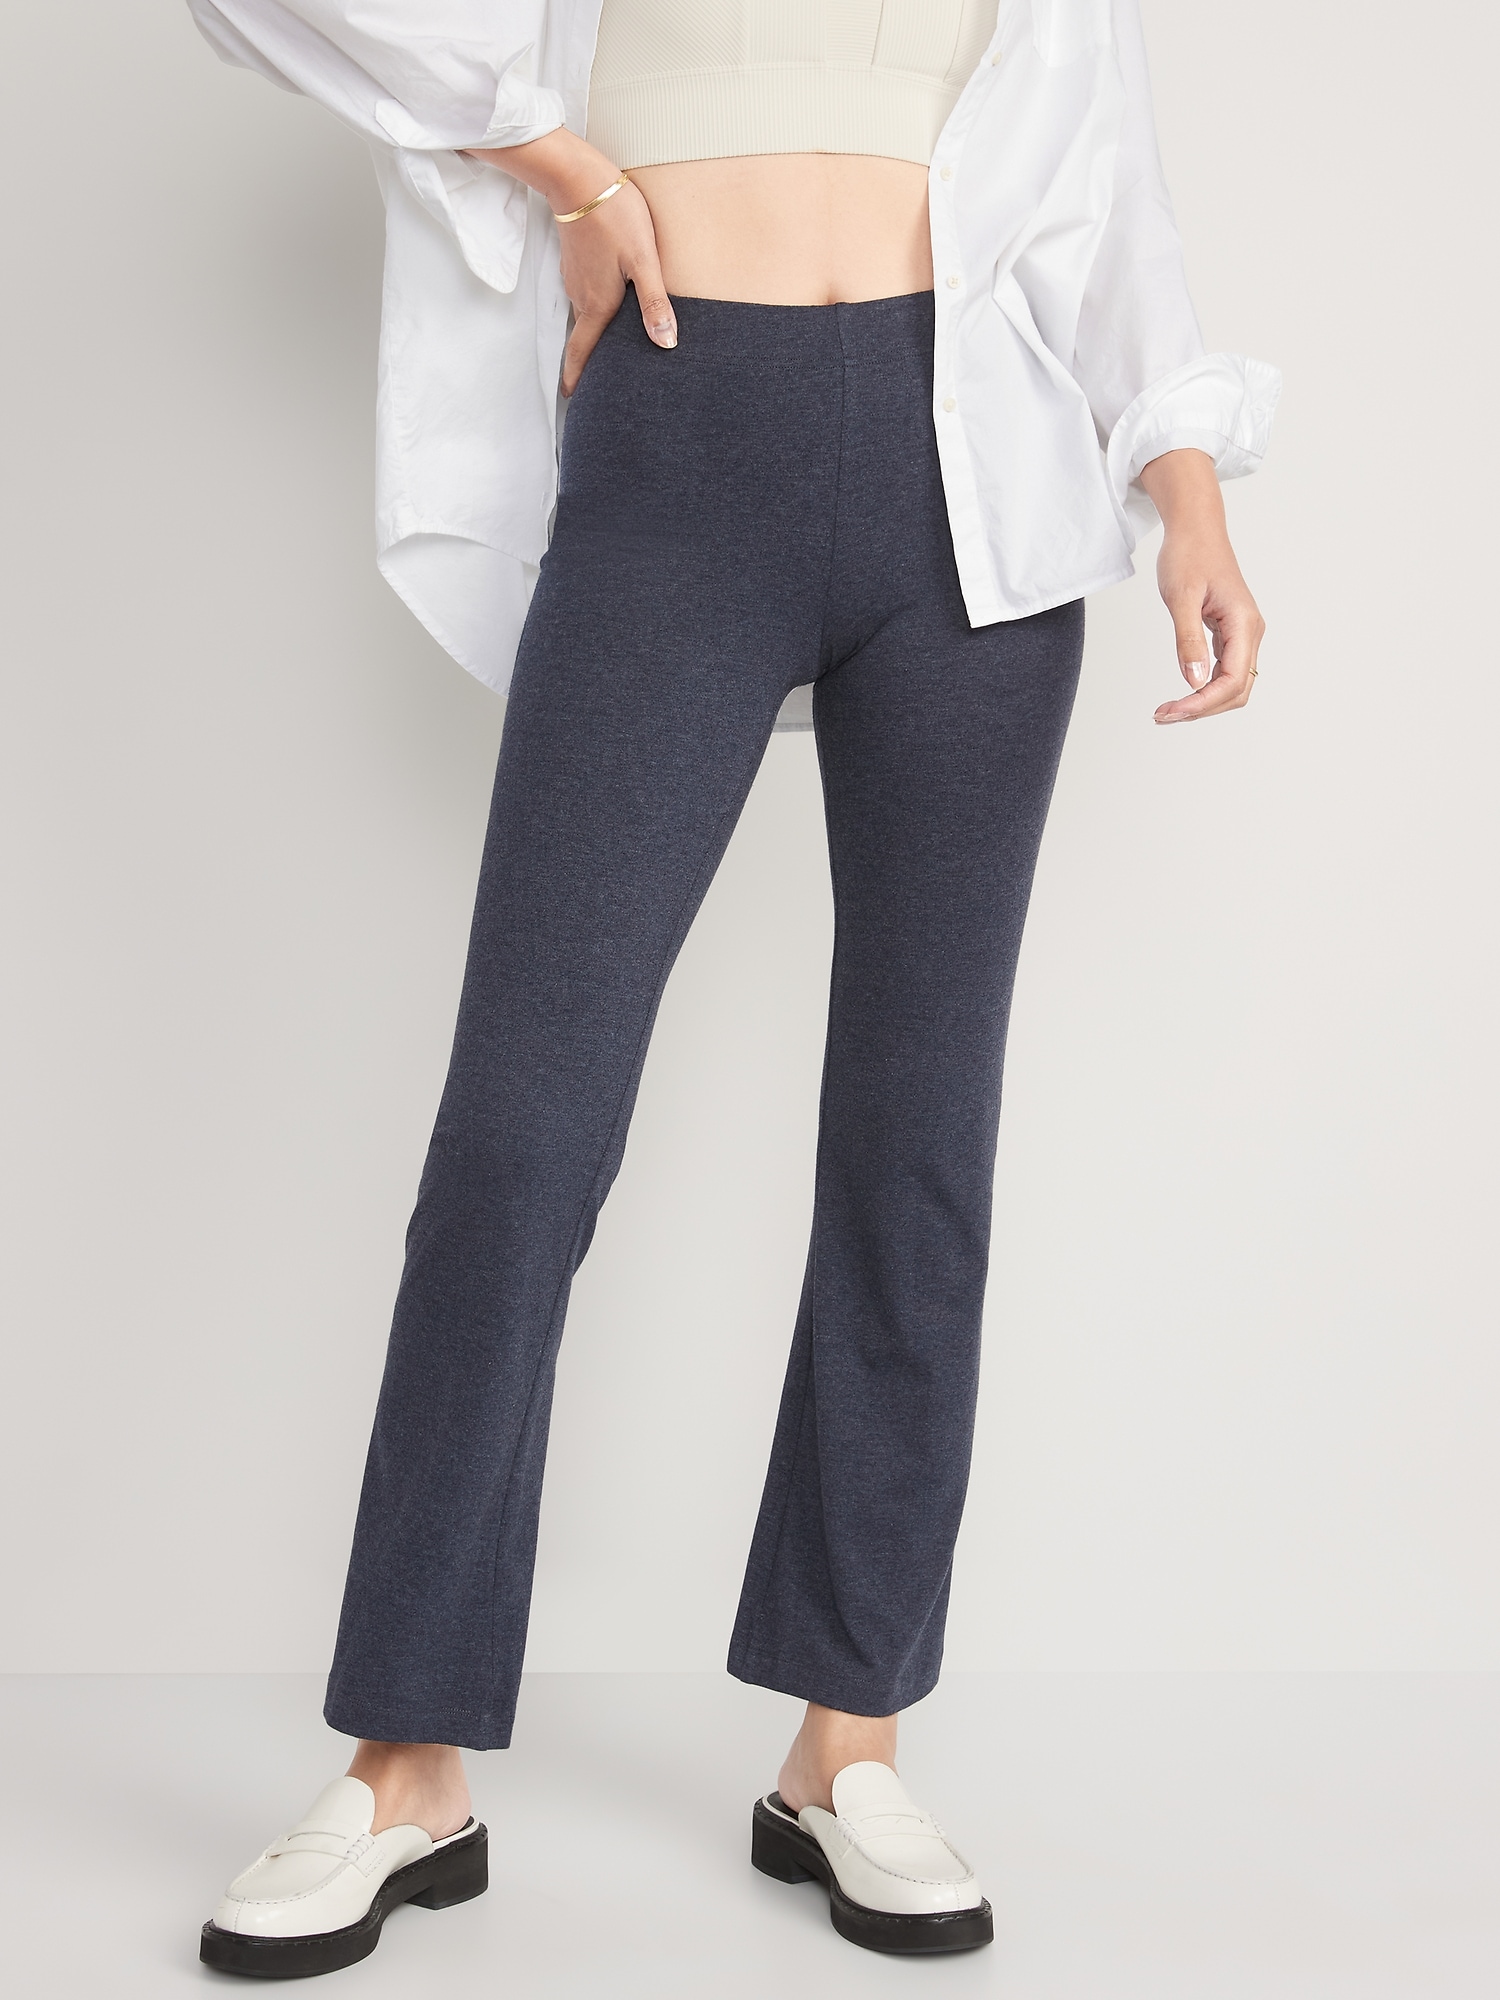 Aerie - Wet flares, don't care.